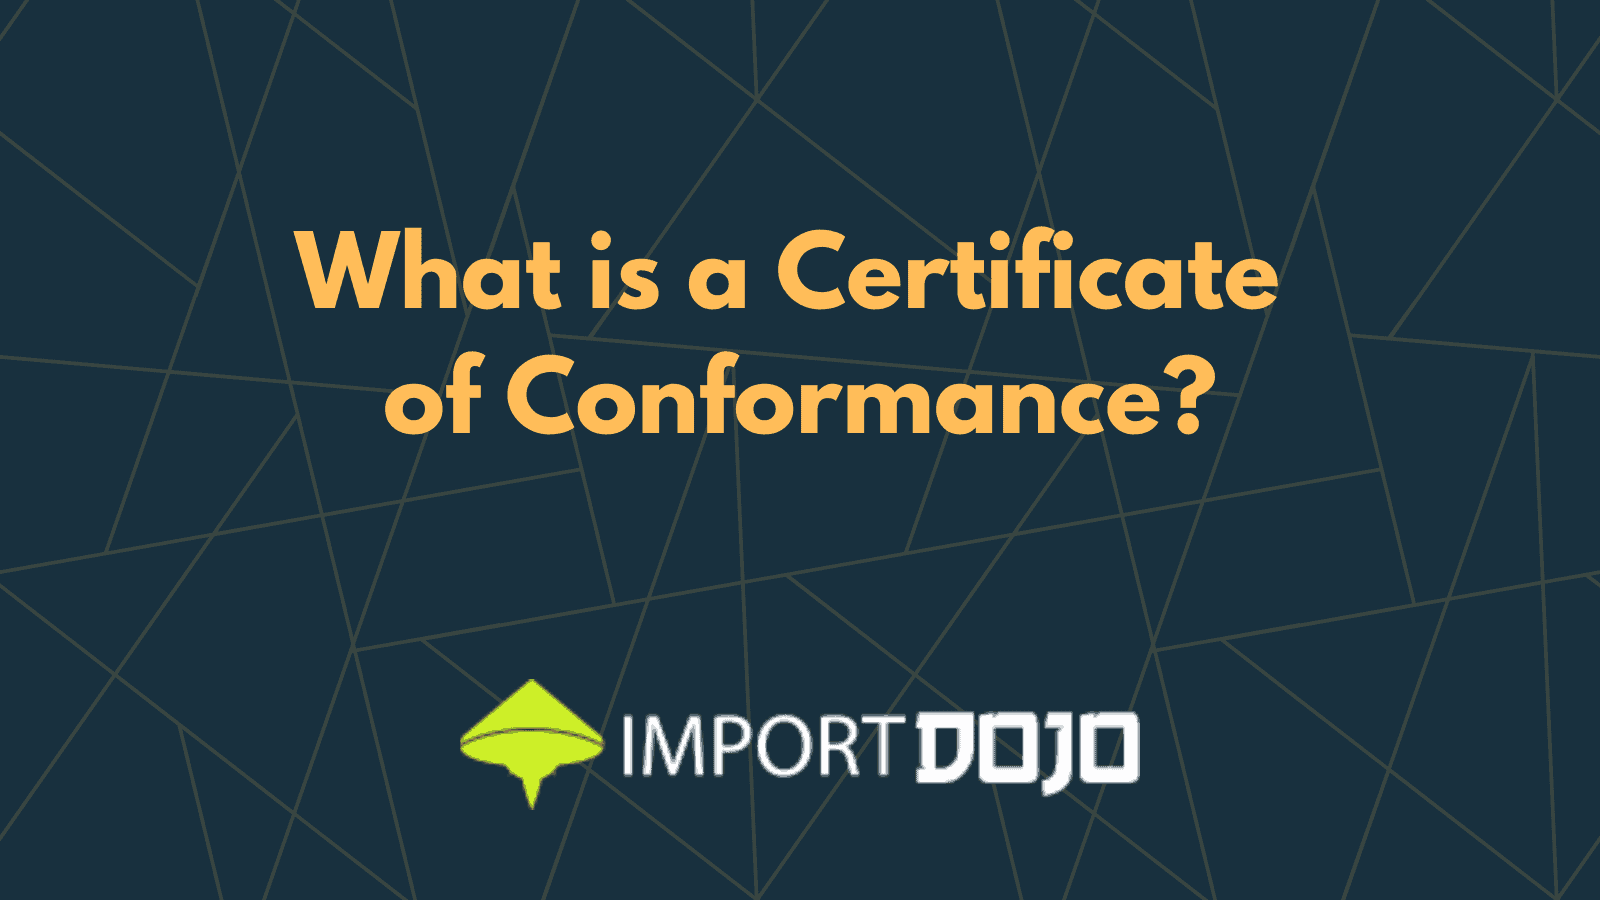 What is a Certificate of Conformance